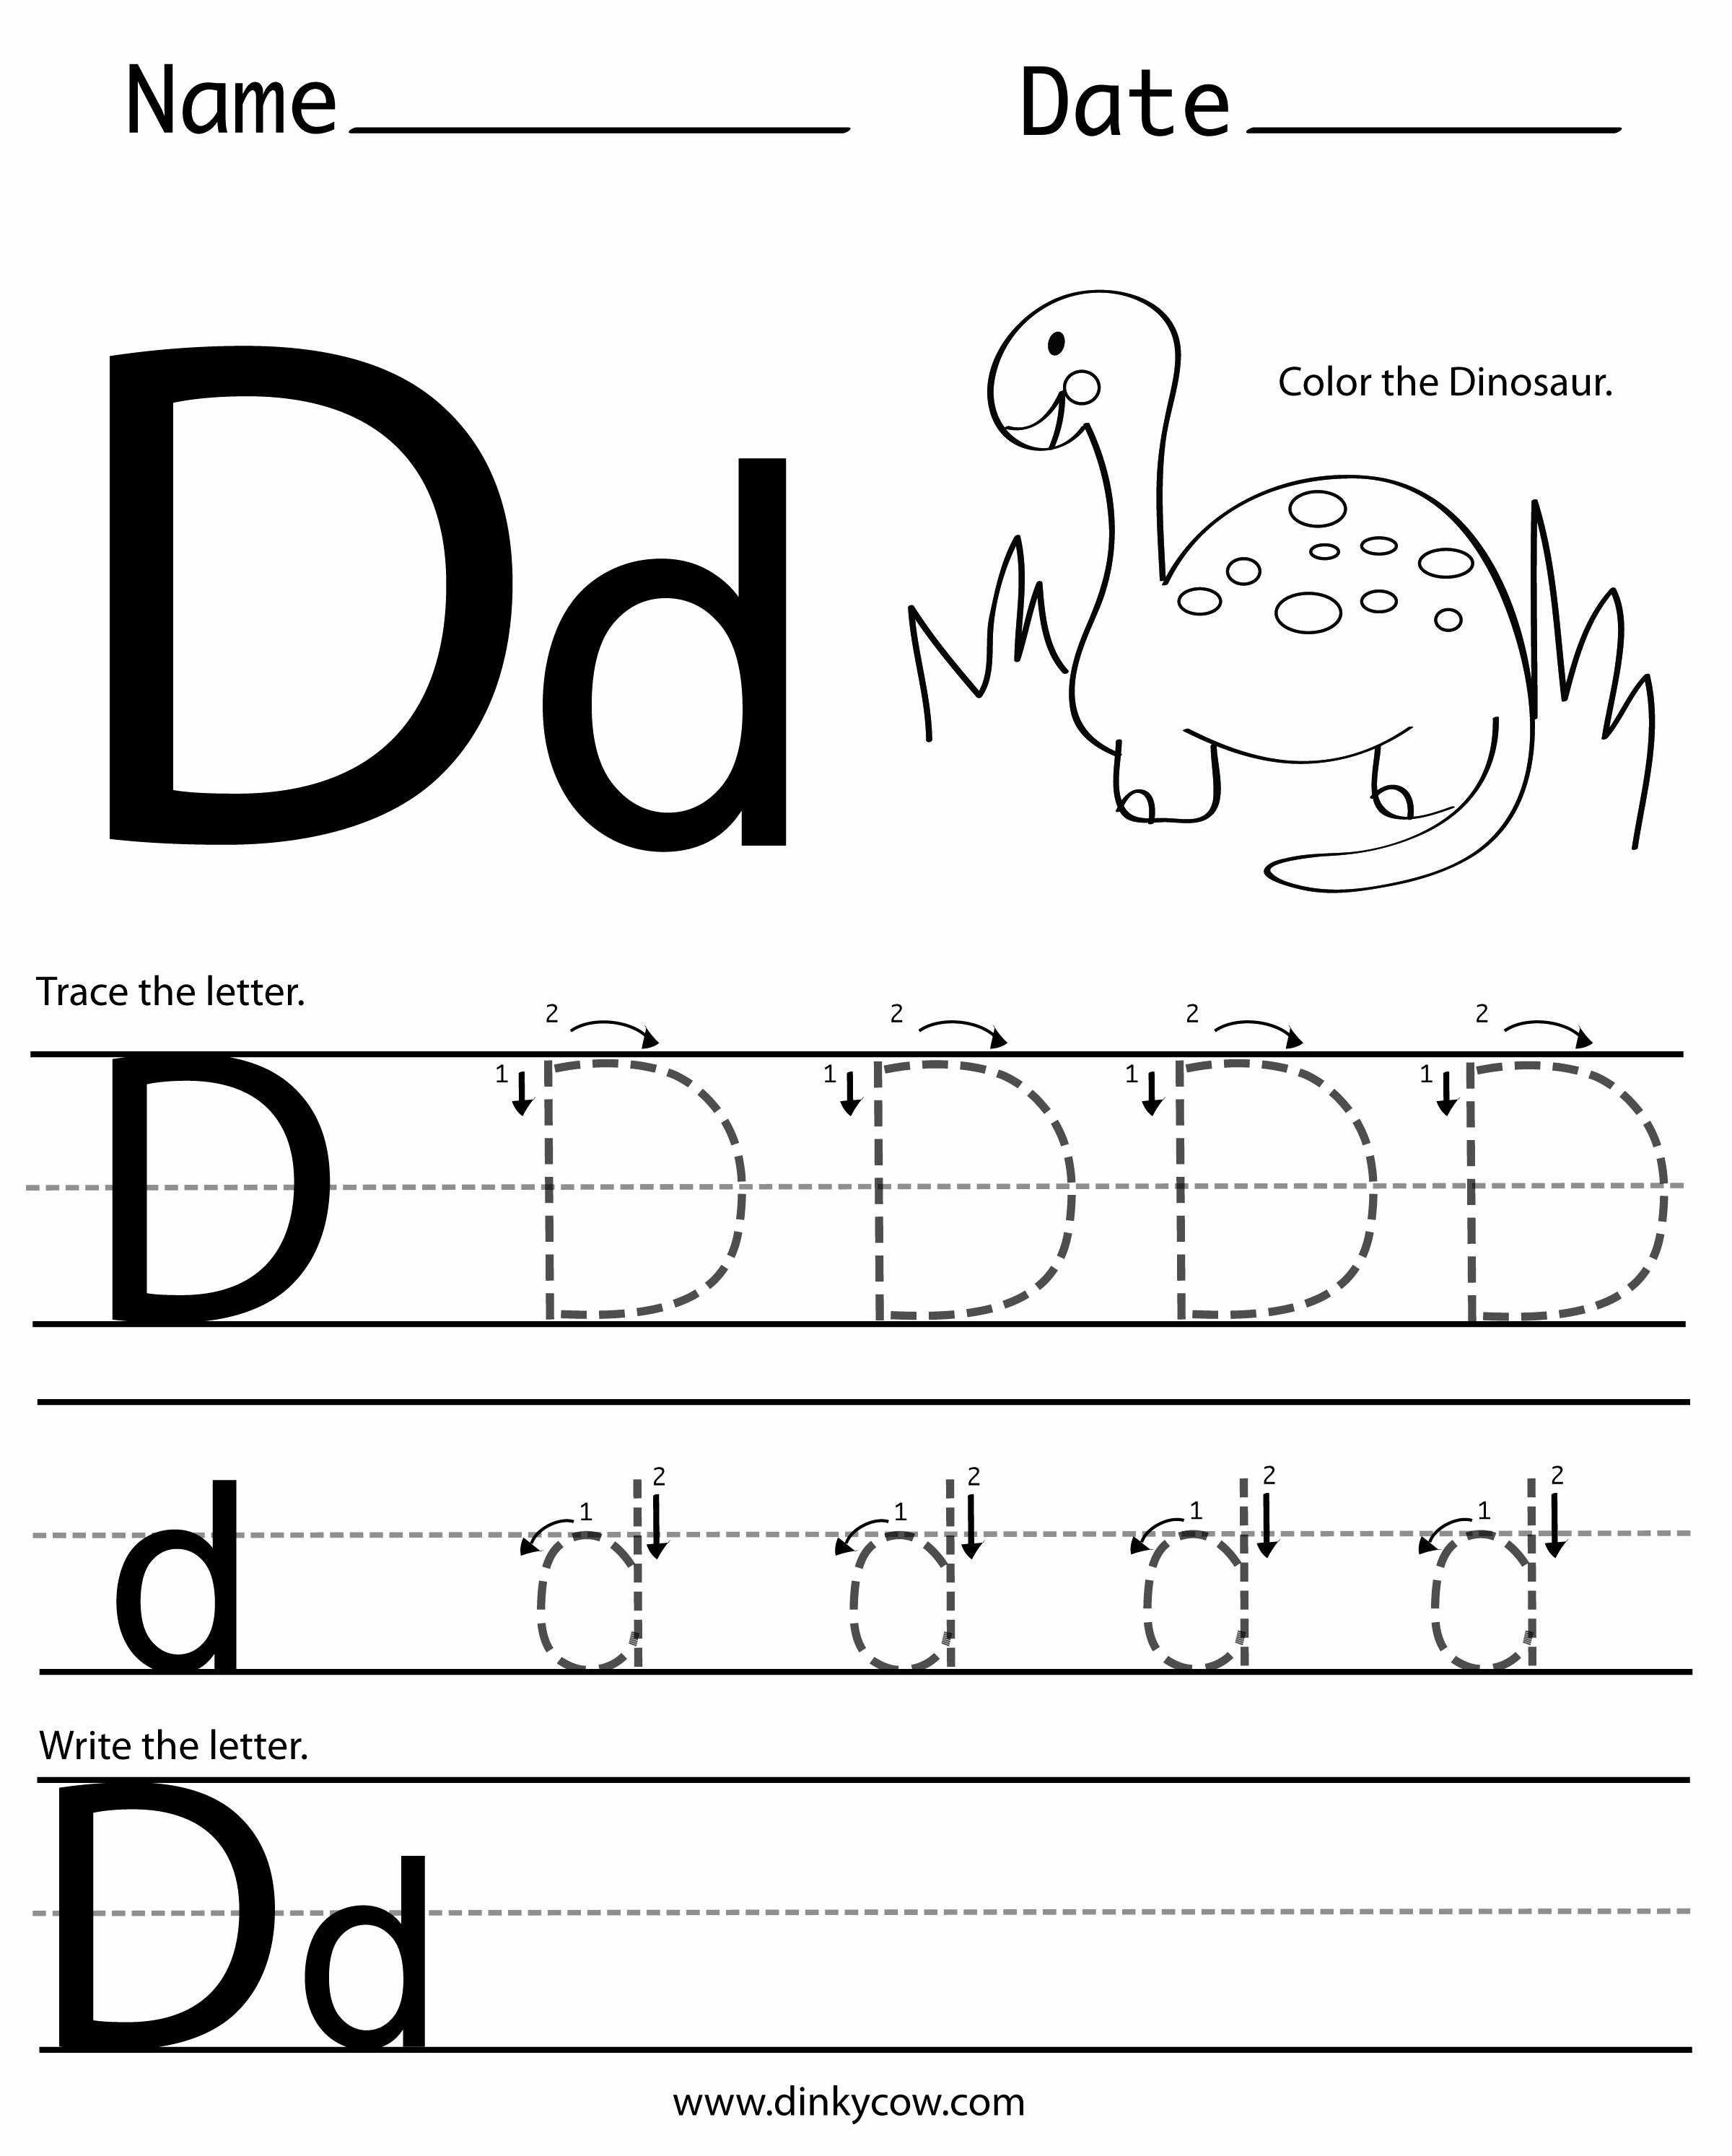 Letter D Worksheet for Preschool Awesome Pin by Loading Name On What I Love